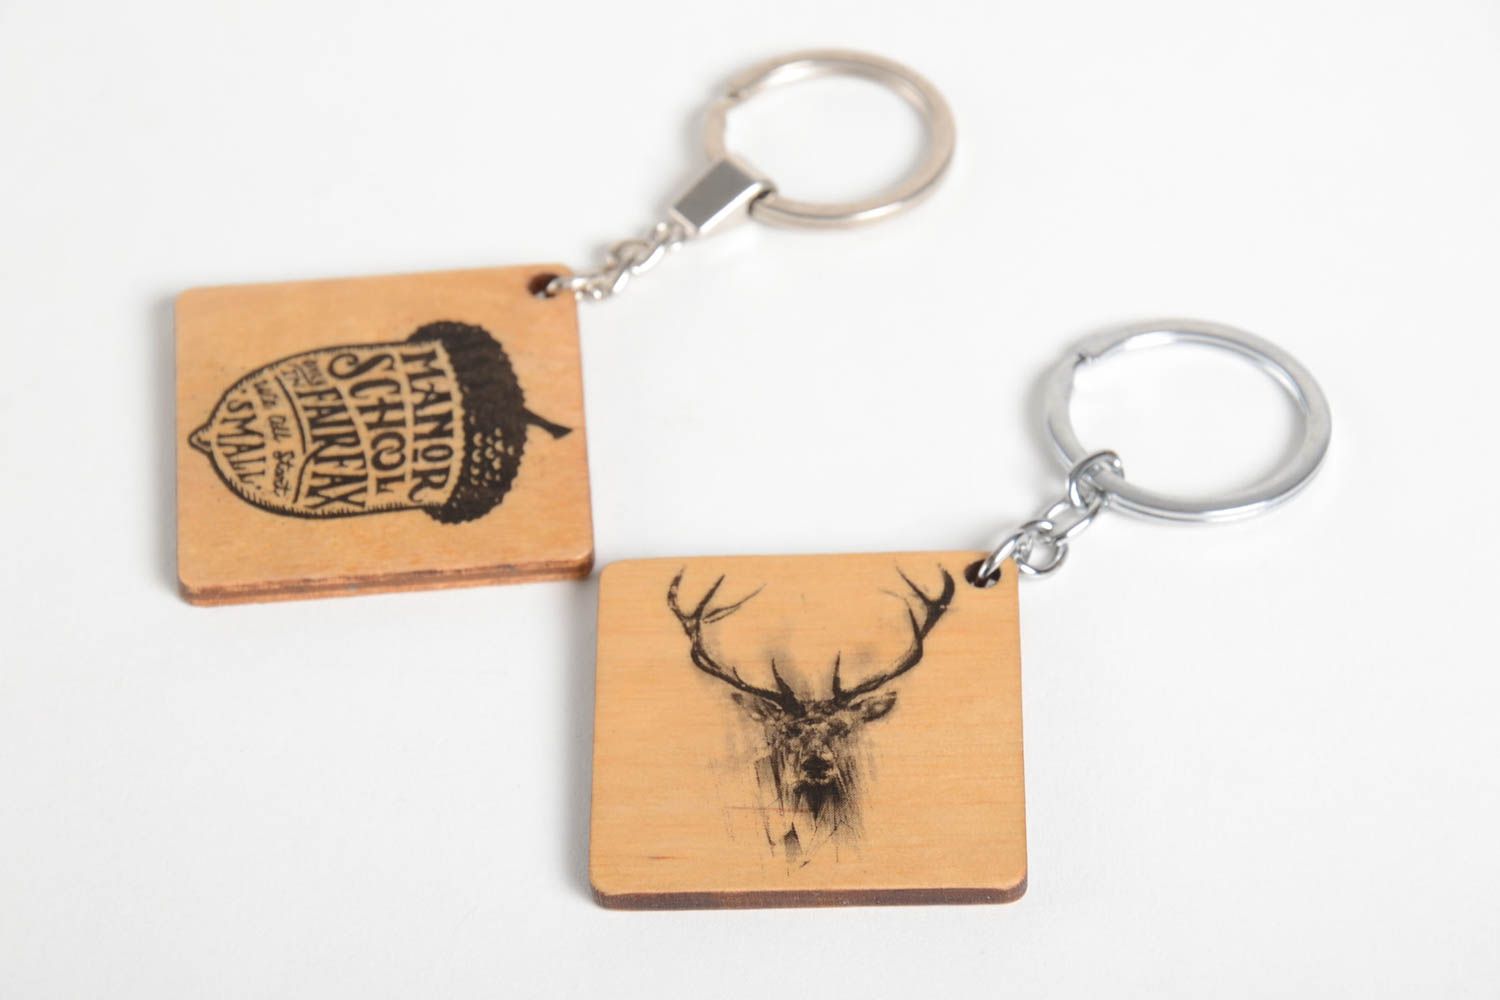 Handmade keychain wooden keychains set of 2 products unusual gift for men photo 2